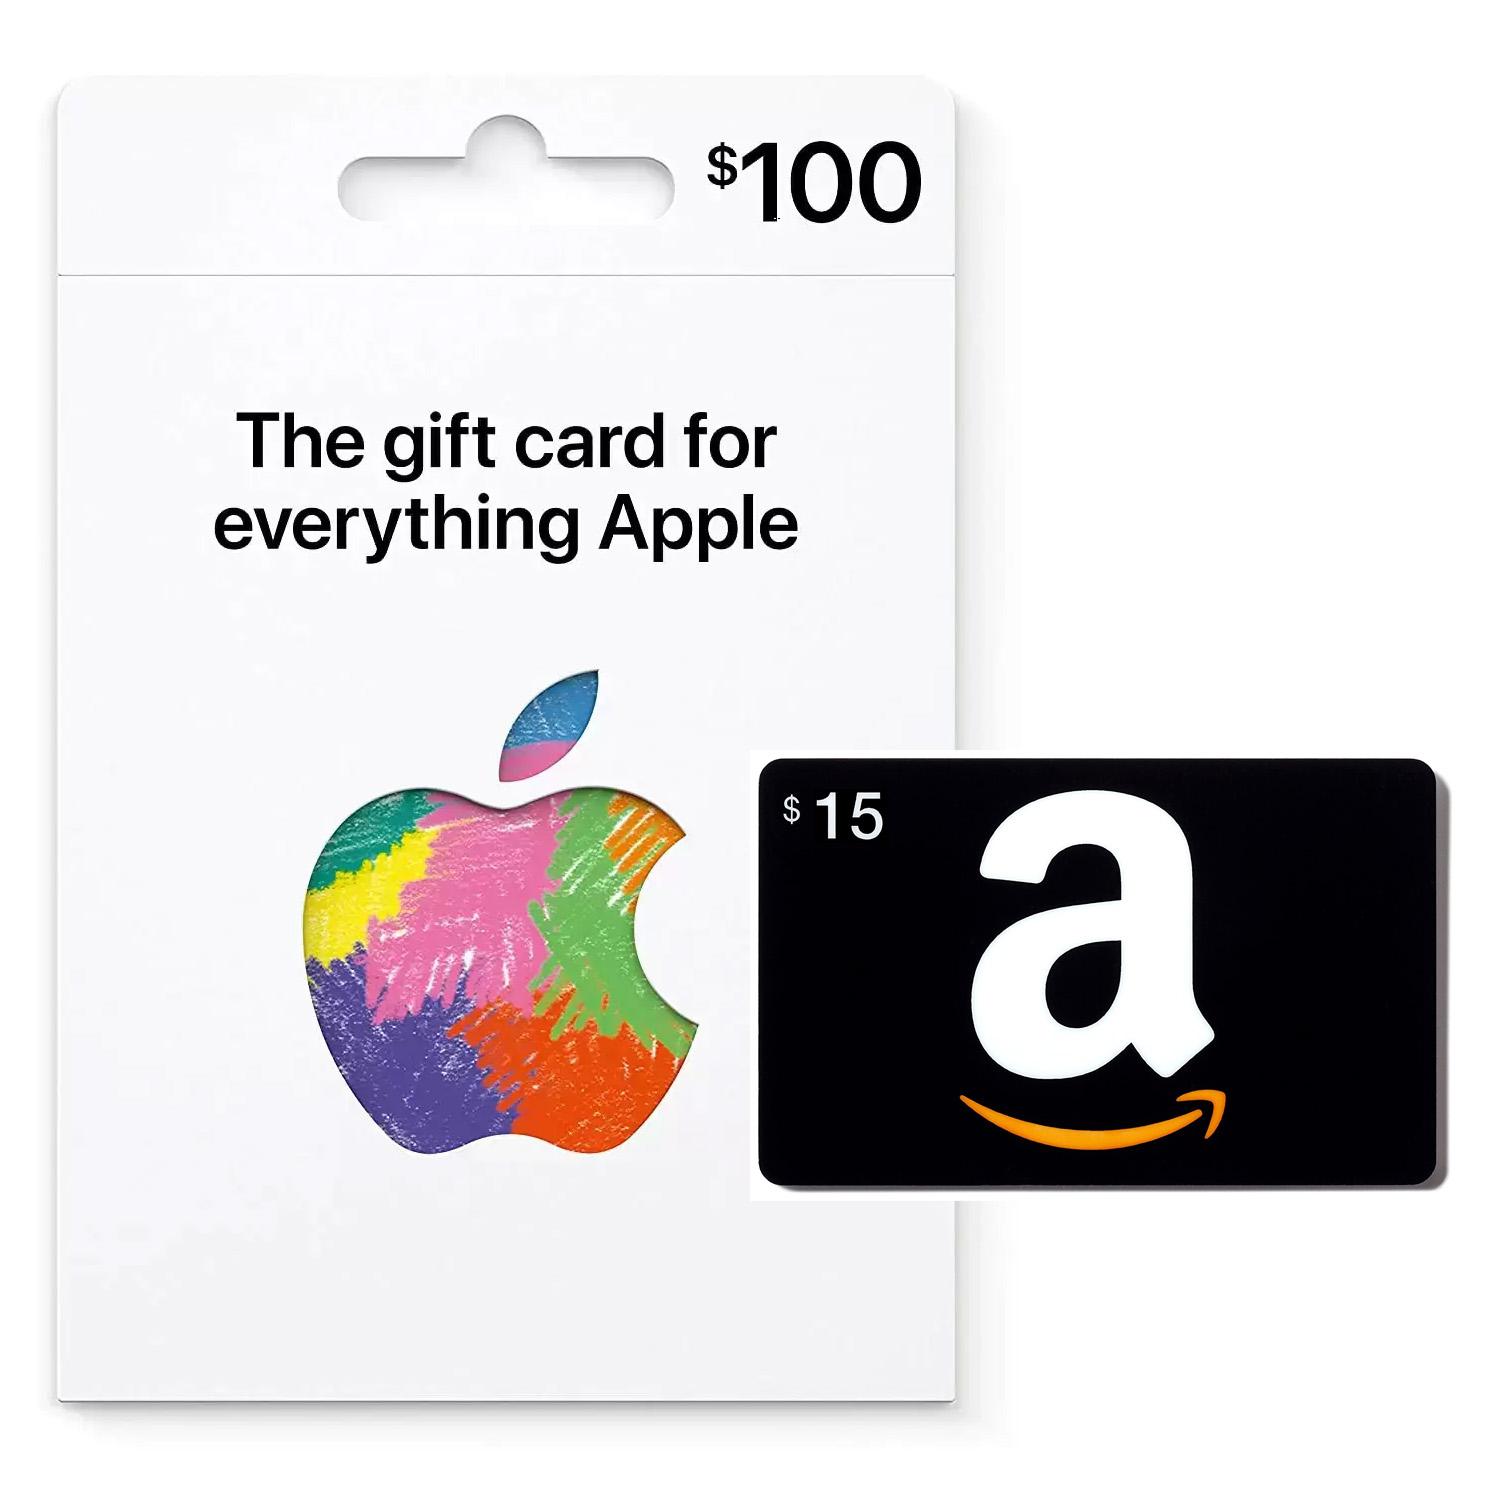 $100 Apple Gift Card with $15 Amazon Gift Card for $100